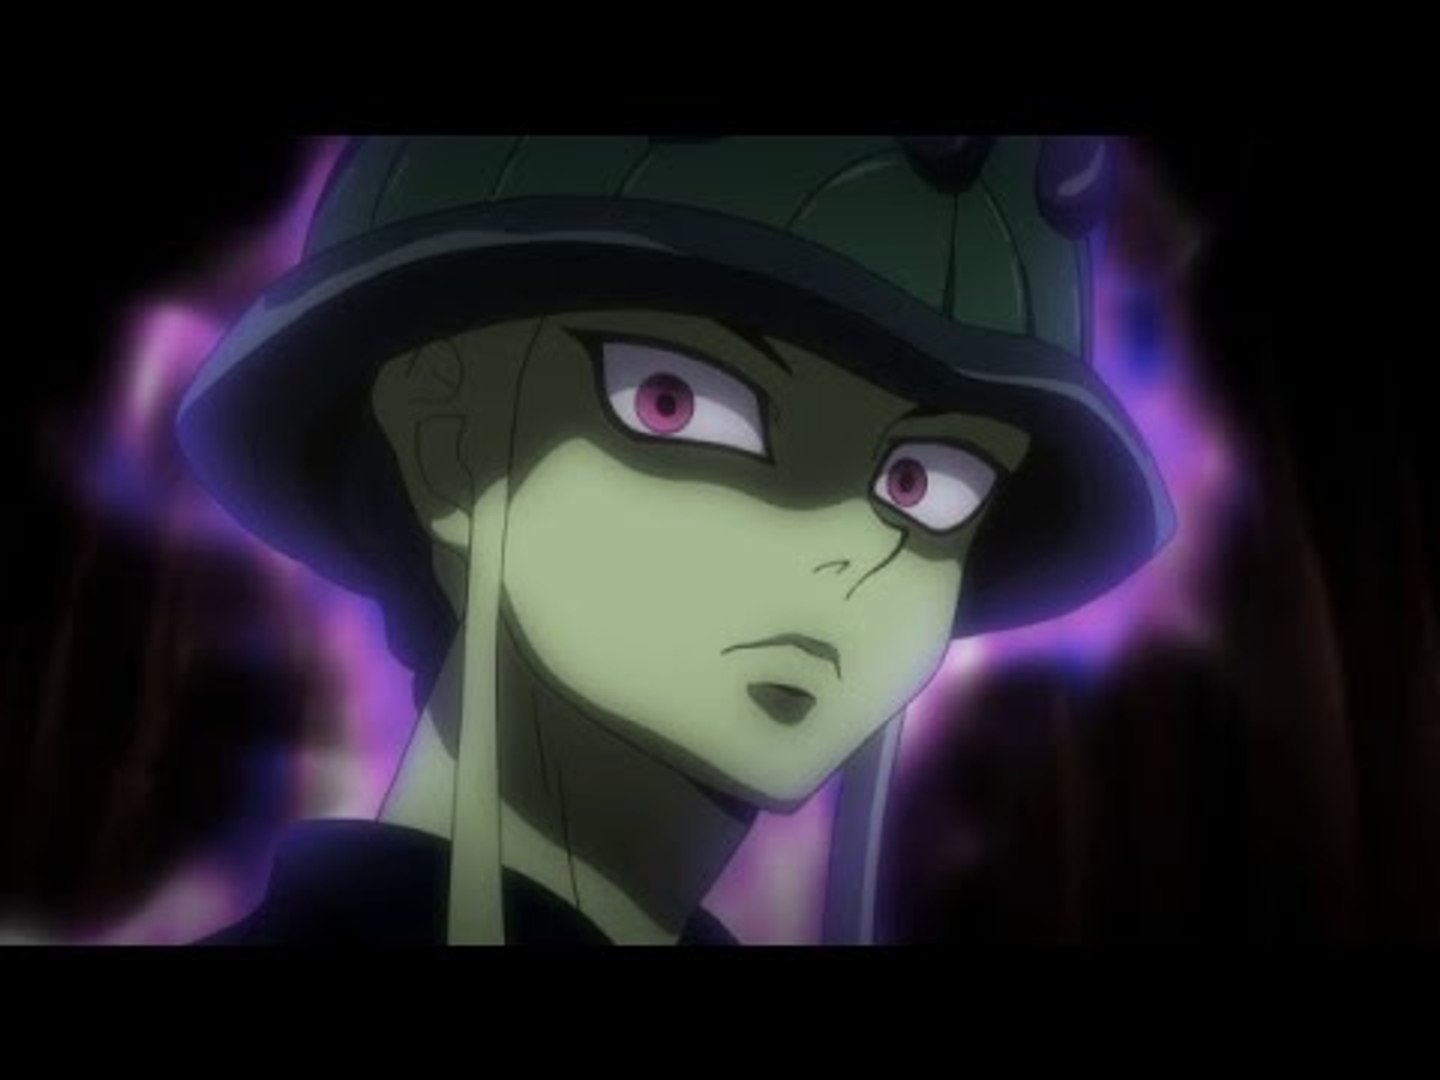 Hunter x Hunter (2011) Chimera Ant Arc Review (Spoilers